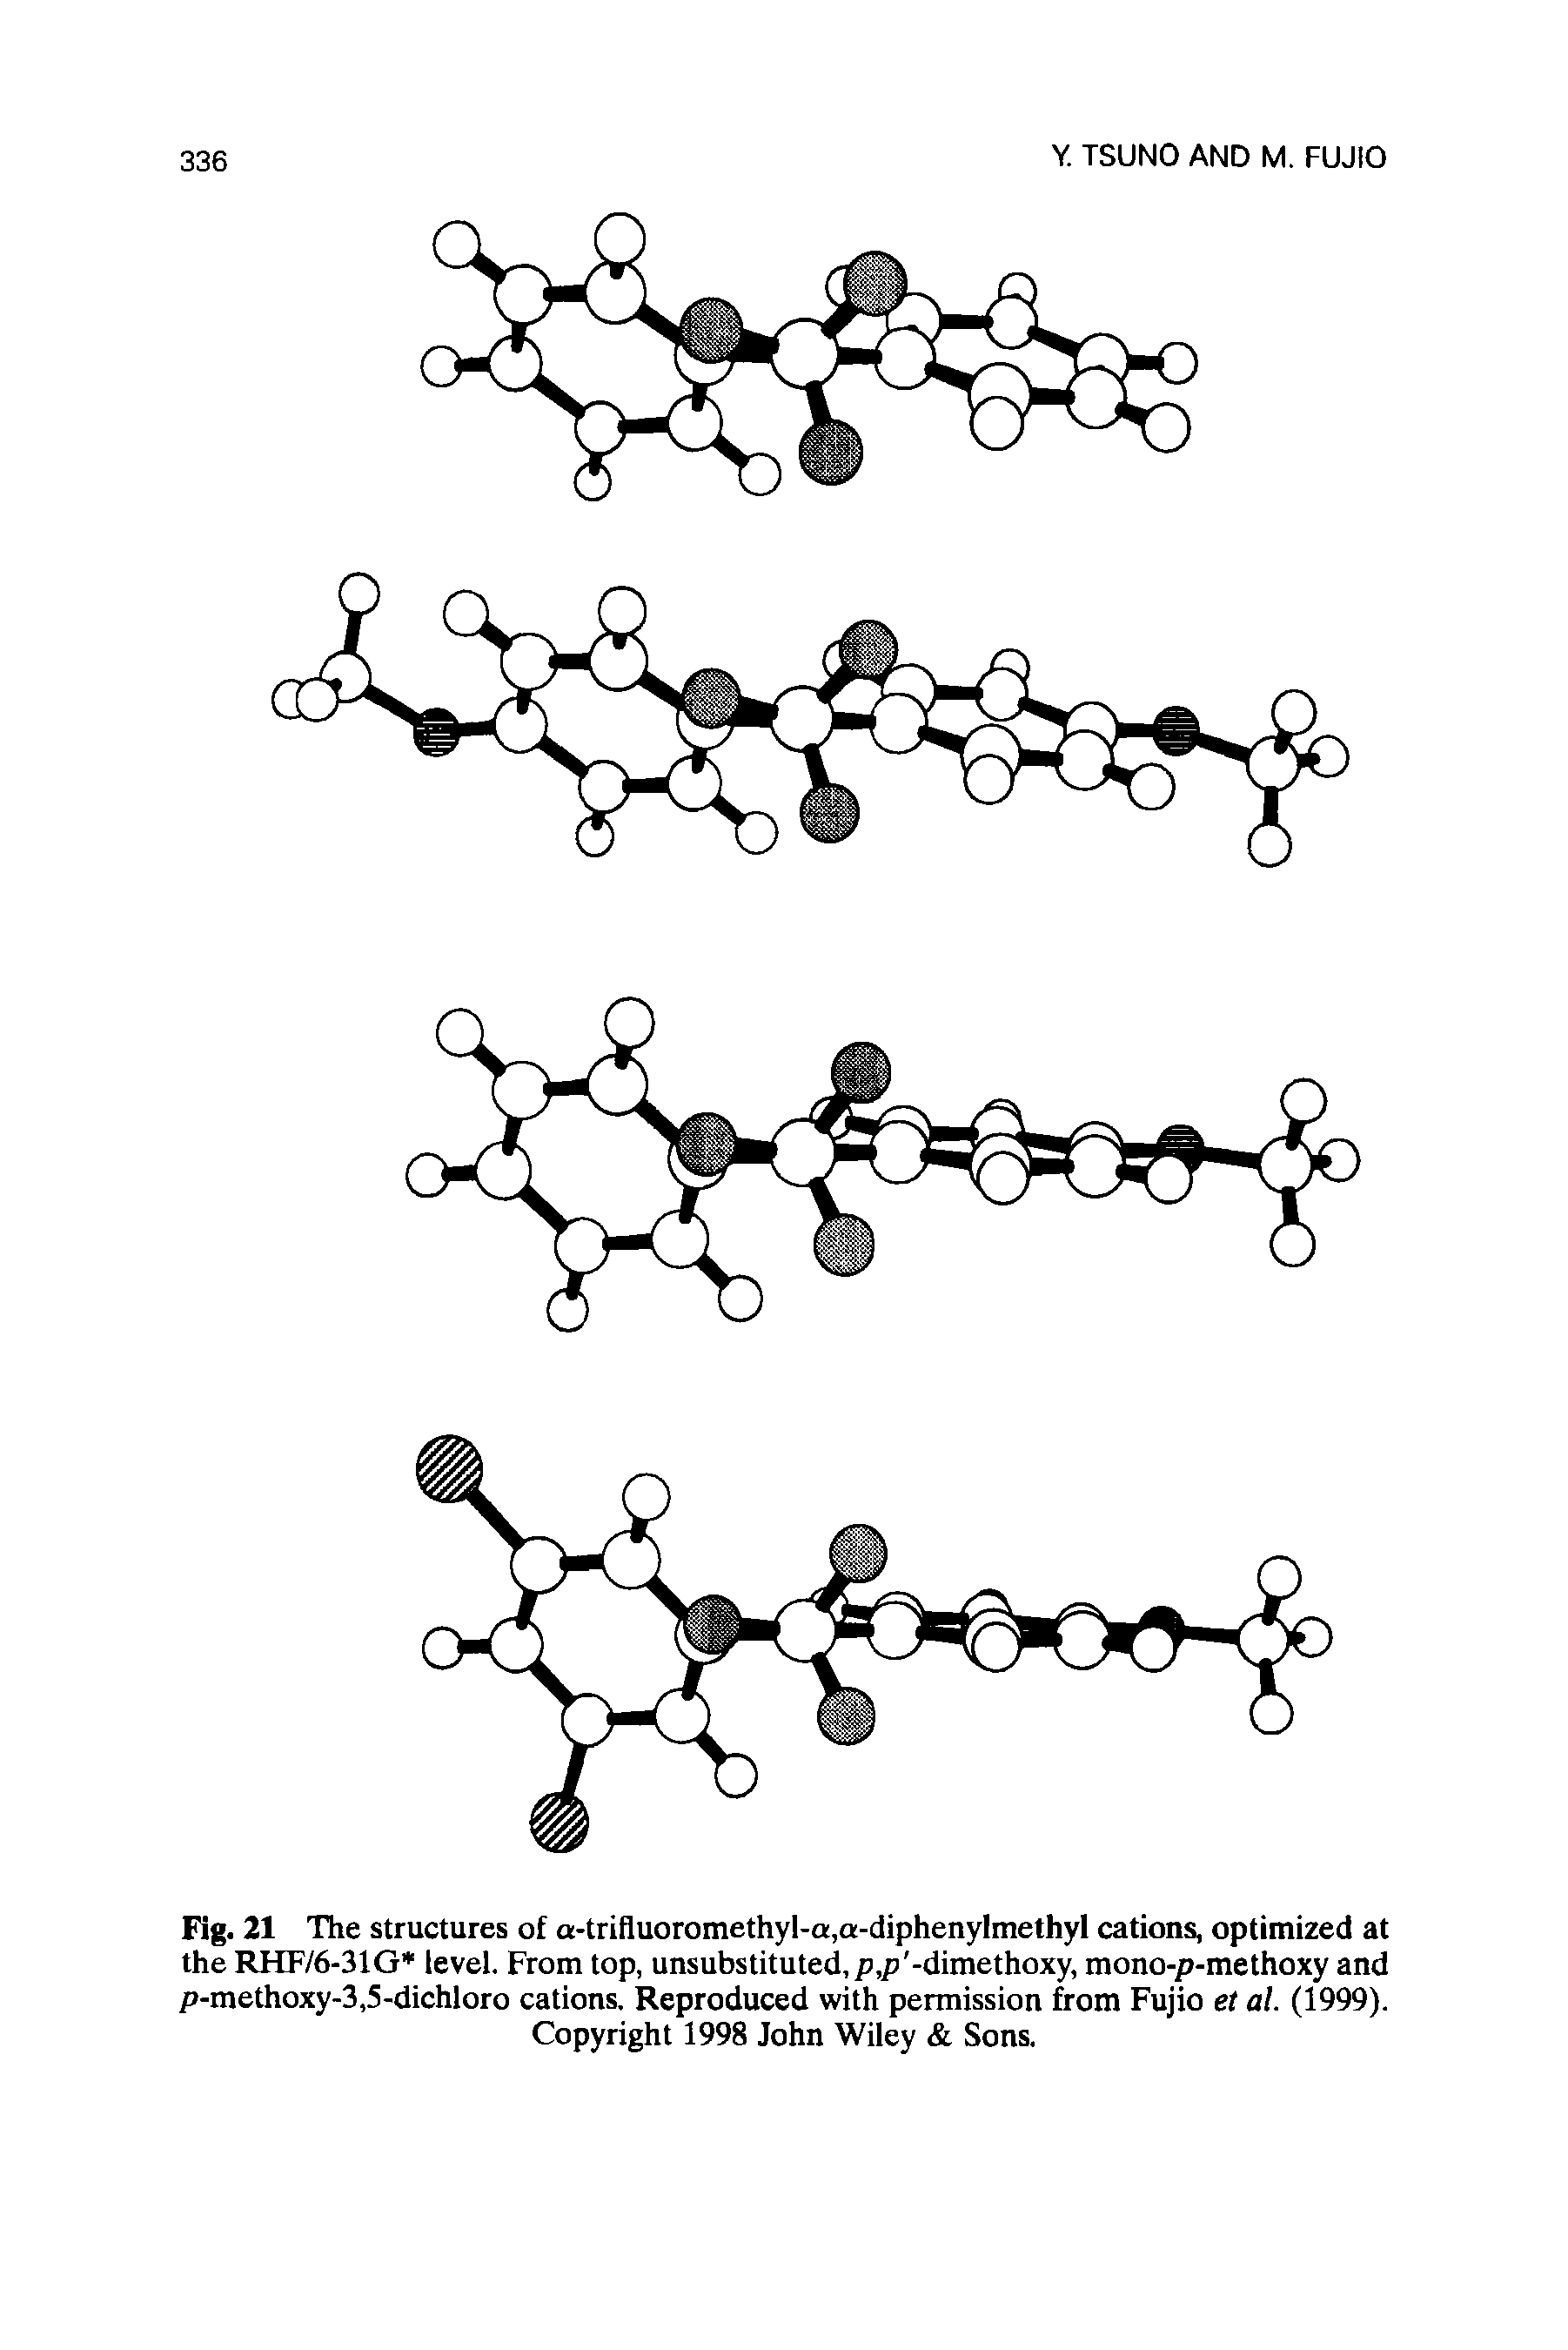 Fig. 21 The structures of a-trifluoromethyl-a,a-diphenylmethyl cations, optimized at the RHF/6-31G level. From top, unsubstituted, p,p -dimethoxy, mono-p-methoxy and p-methoxy-3,5-dichloro cations. Reproduced with permission from Fujio et al. (1999). Copyright 1998 John Wiley Sons.